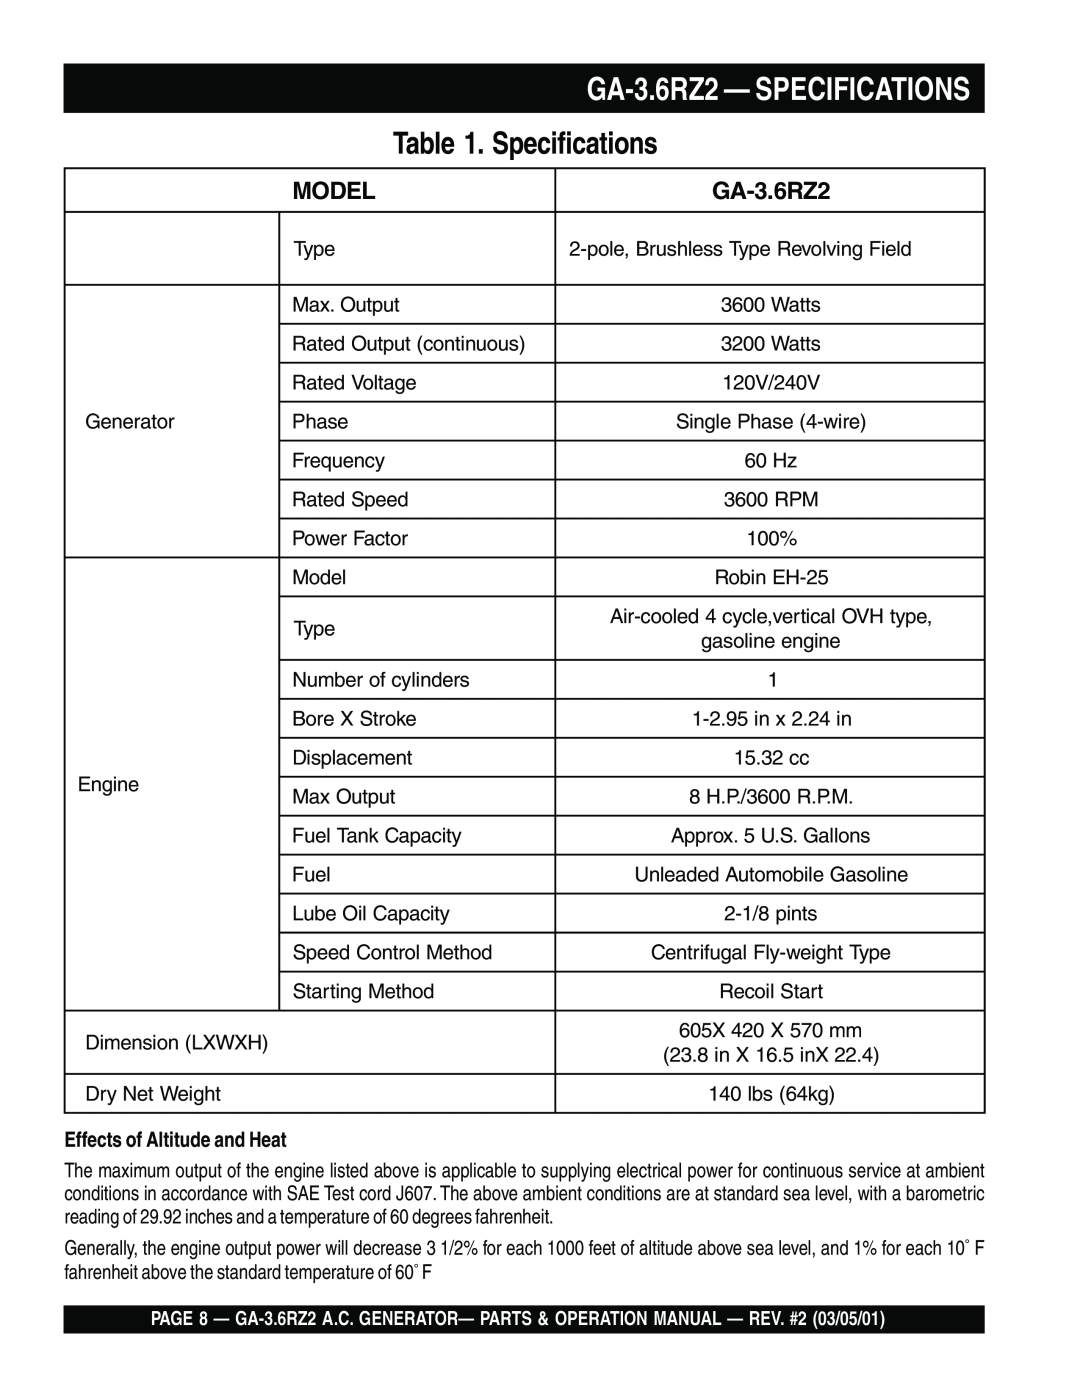 Multiquip operation manual Specifications, GA-3.6RZ2— SPECIFICATIONS, Model, Effects of Altitude and Heat 